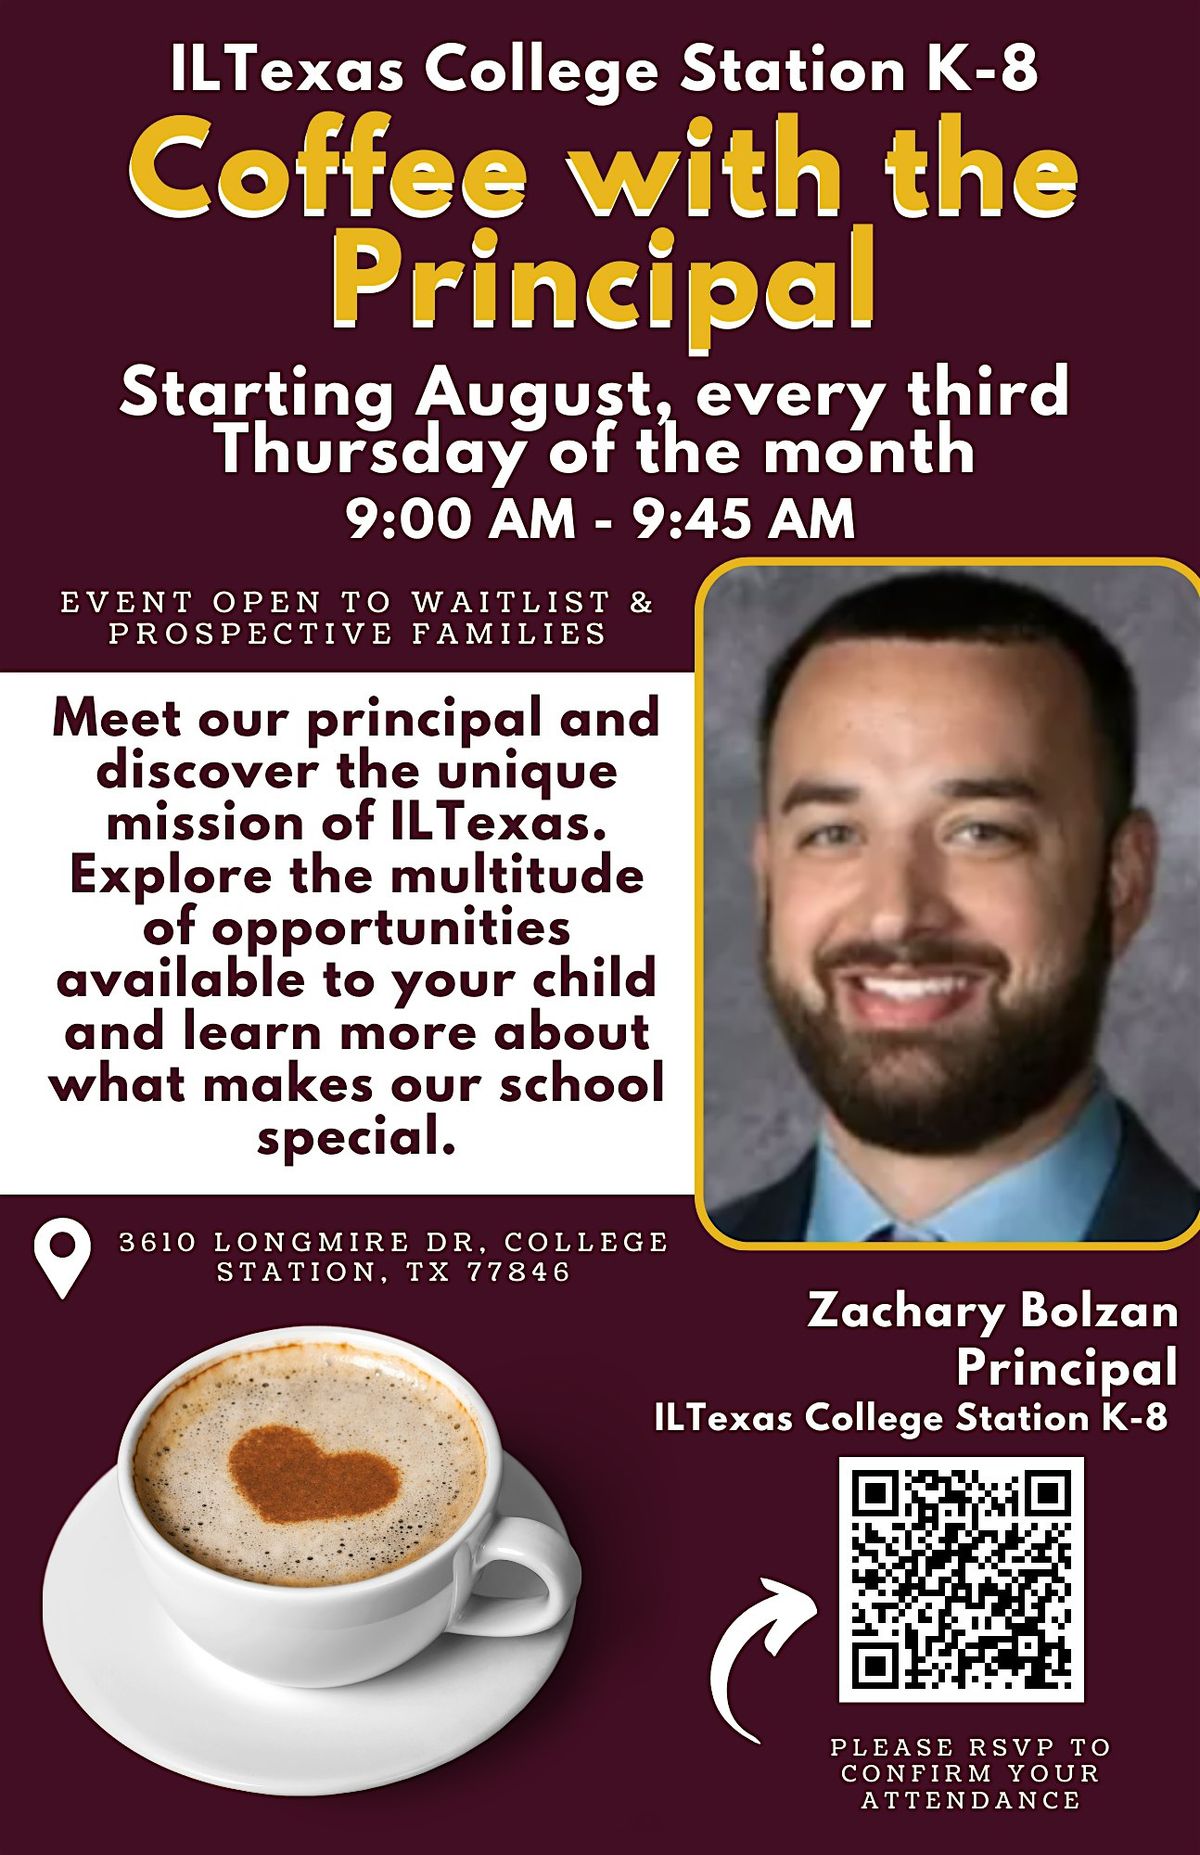 ILTexas College Station K-8 Coffee with the Principal